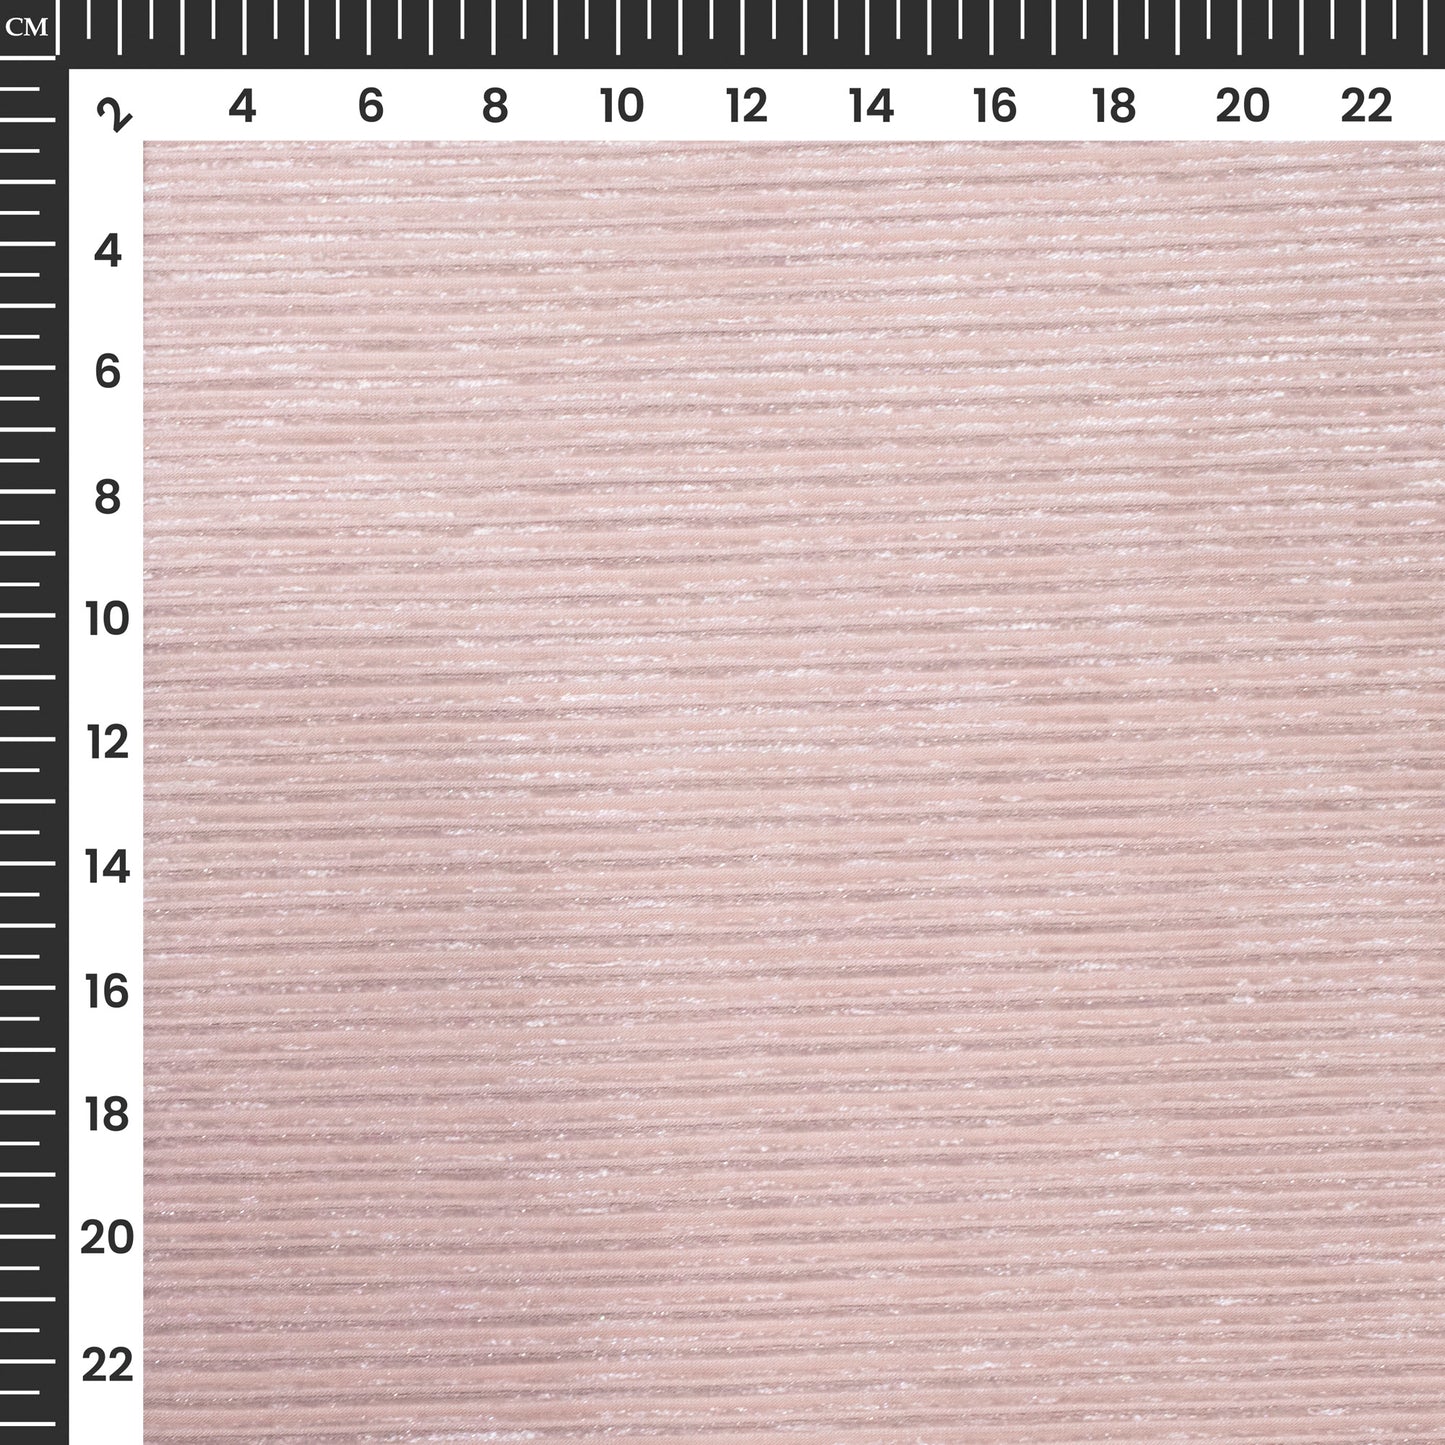 Exclusive Peach Stripes Luxurious Imported Velvet Fabric